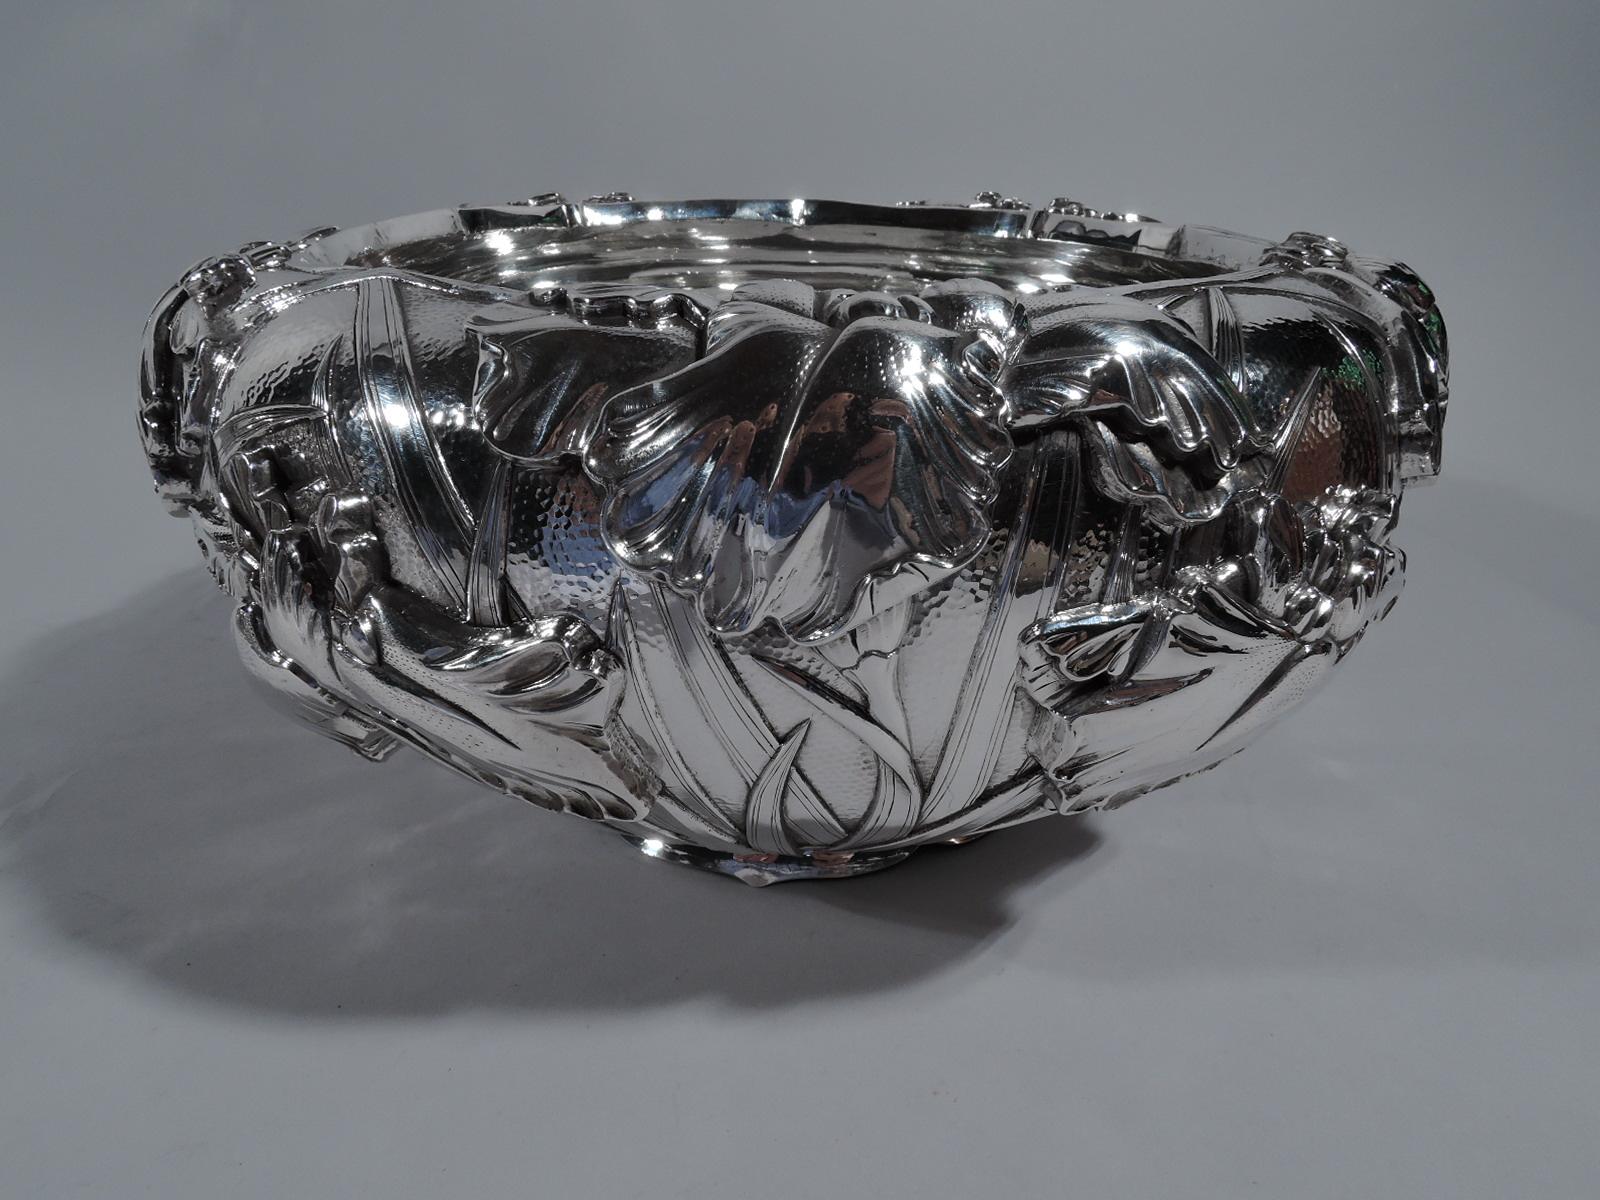 Beautiful turn-of-the-century Japanese silver bowl. Retailed by Arthur & Bond in Yokohama. Curved and tapering on plain scalloped foot ring. Sides exterior have applied irises in up-down arrangement with swaying tendrils and stems in eddying water.